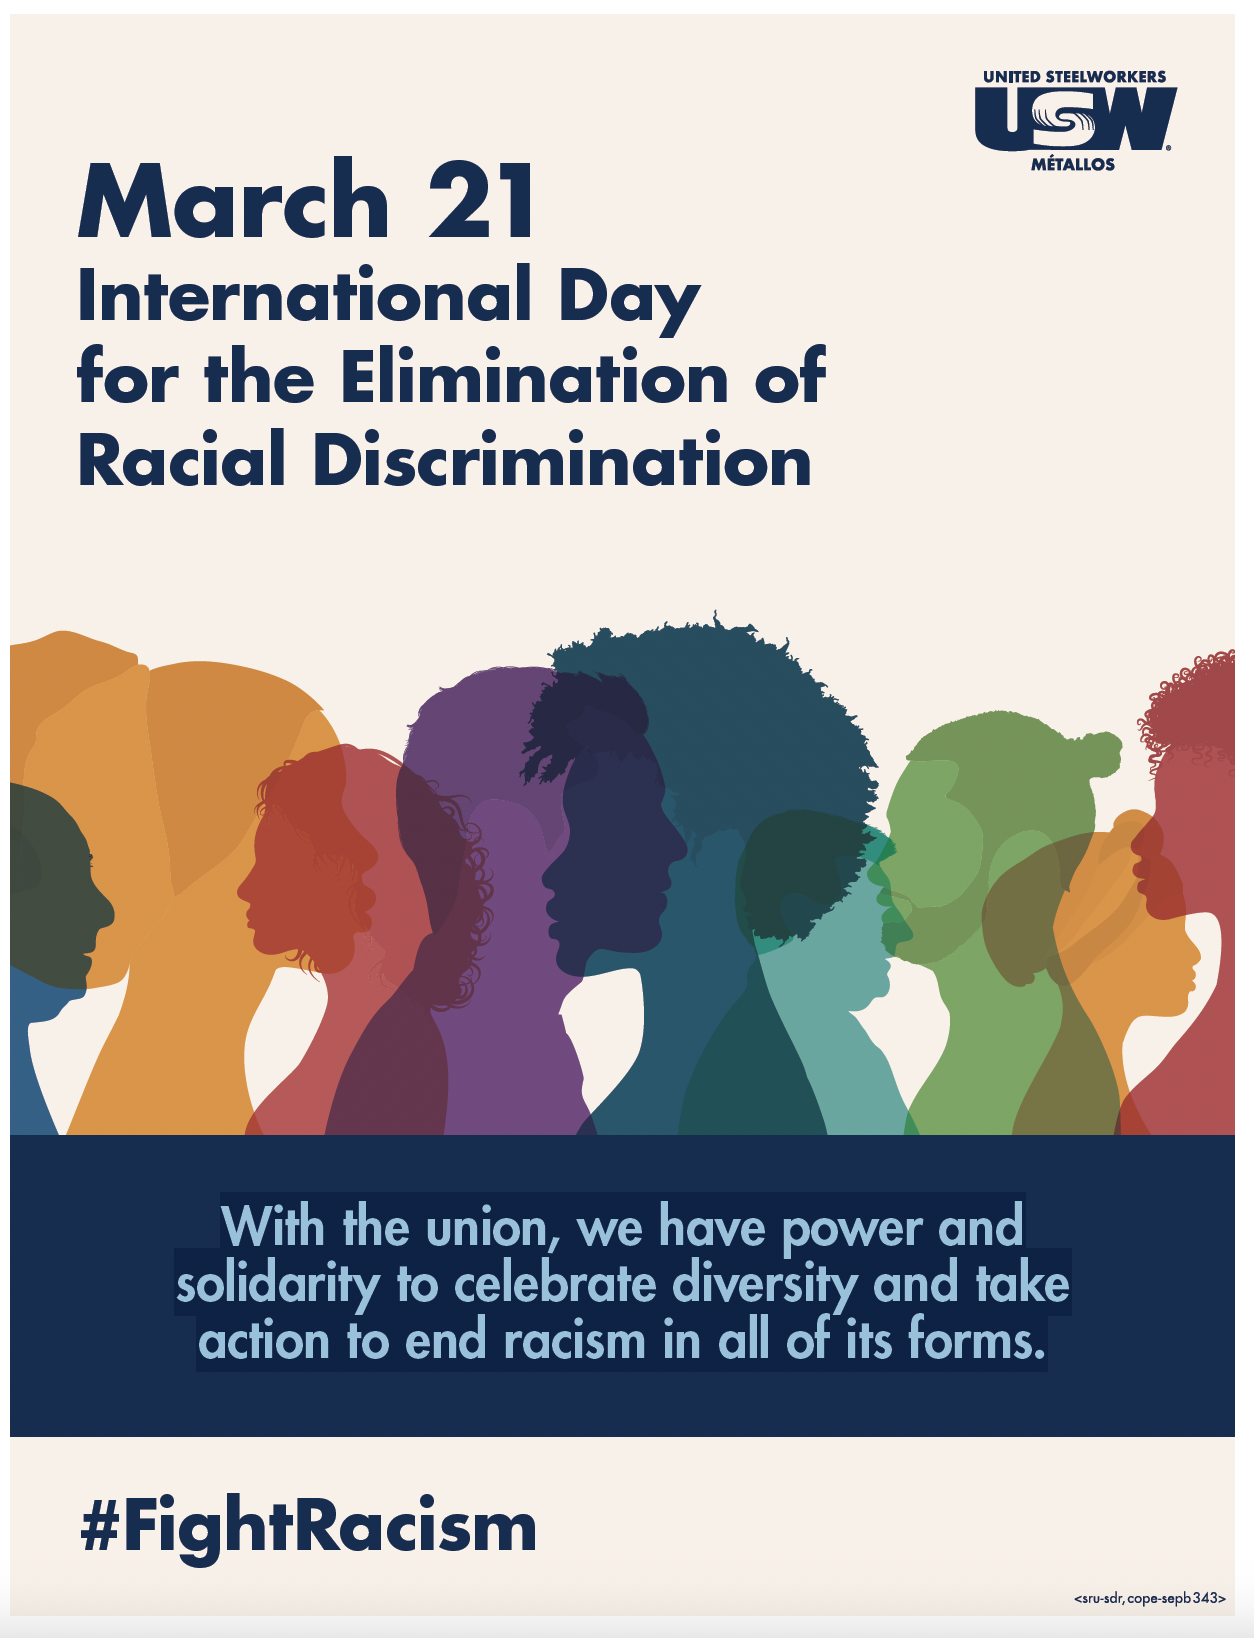 Image: Poster for March 21, the International Day for the Elimination of Racial Discrimination. In the lower third of the poster, there is a layering of silhouettes in different colours including orange, red, purple, blue and green. Below the silhouettes is a blue band with white text: With the union, we have power and solidarity to celebrate diversity and take action to end racism in all of its forms. There is a USW logo in the upper right. At the bottom of the poster: #FightRacism